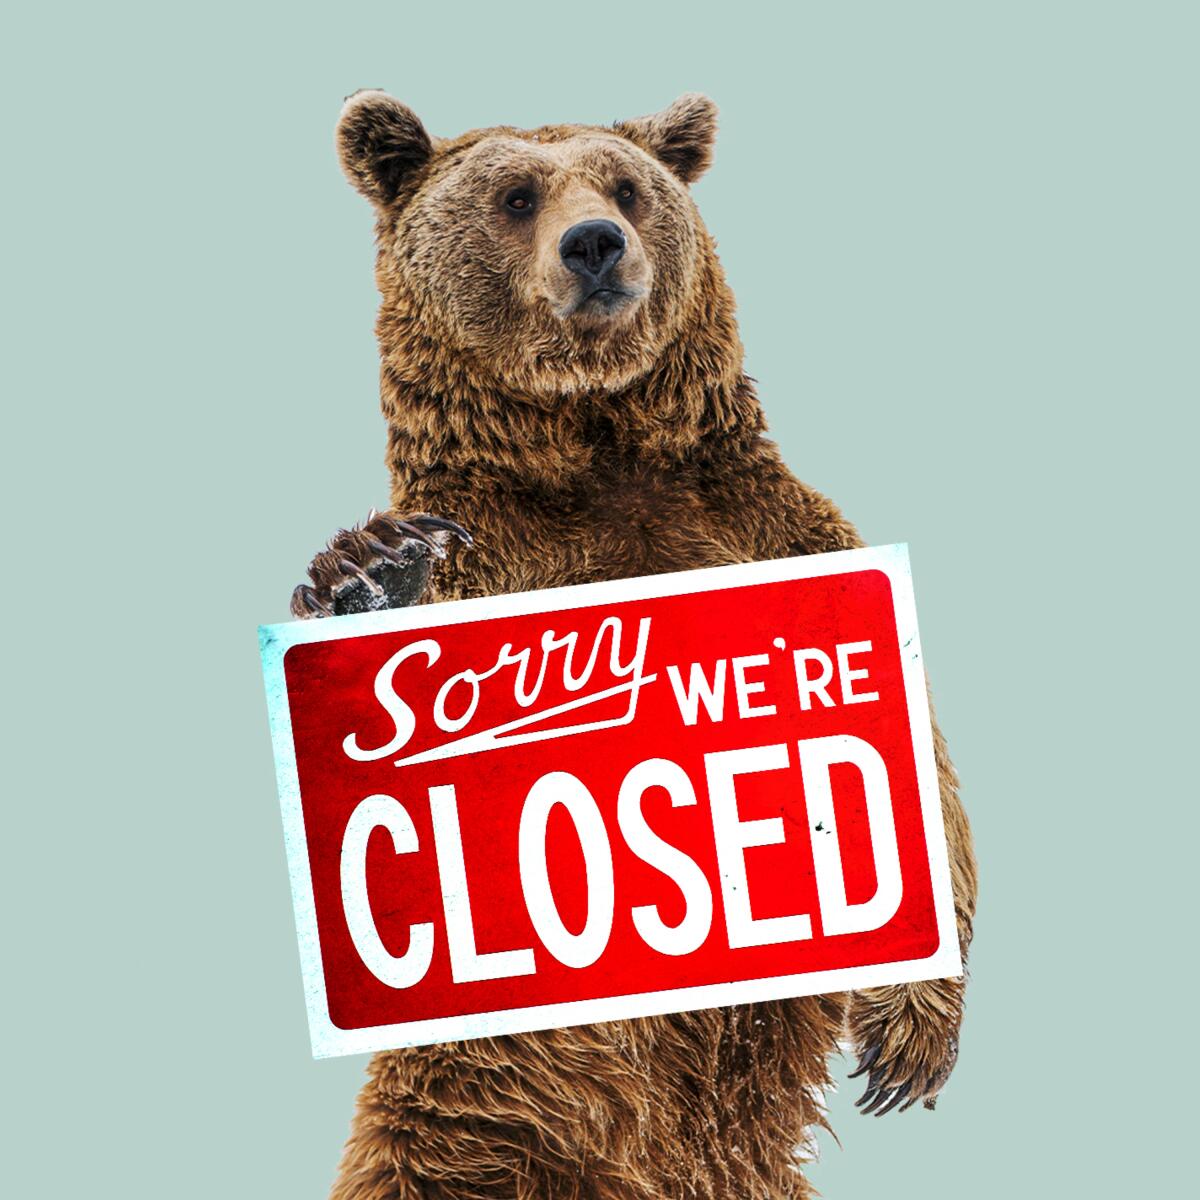 A bear stands behind a sign that says "Sorry we're closed."